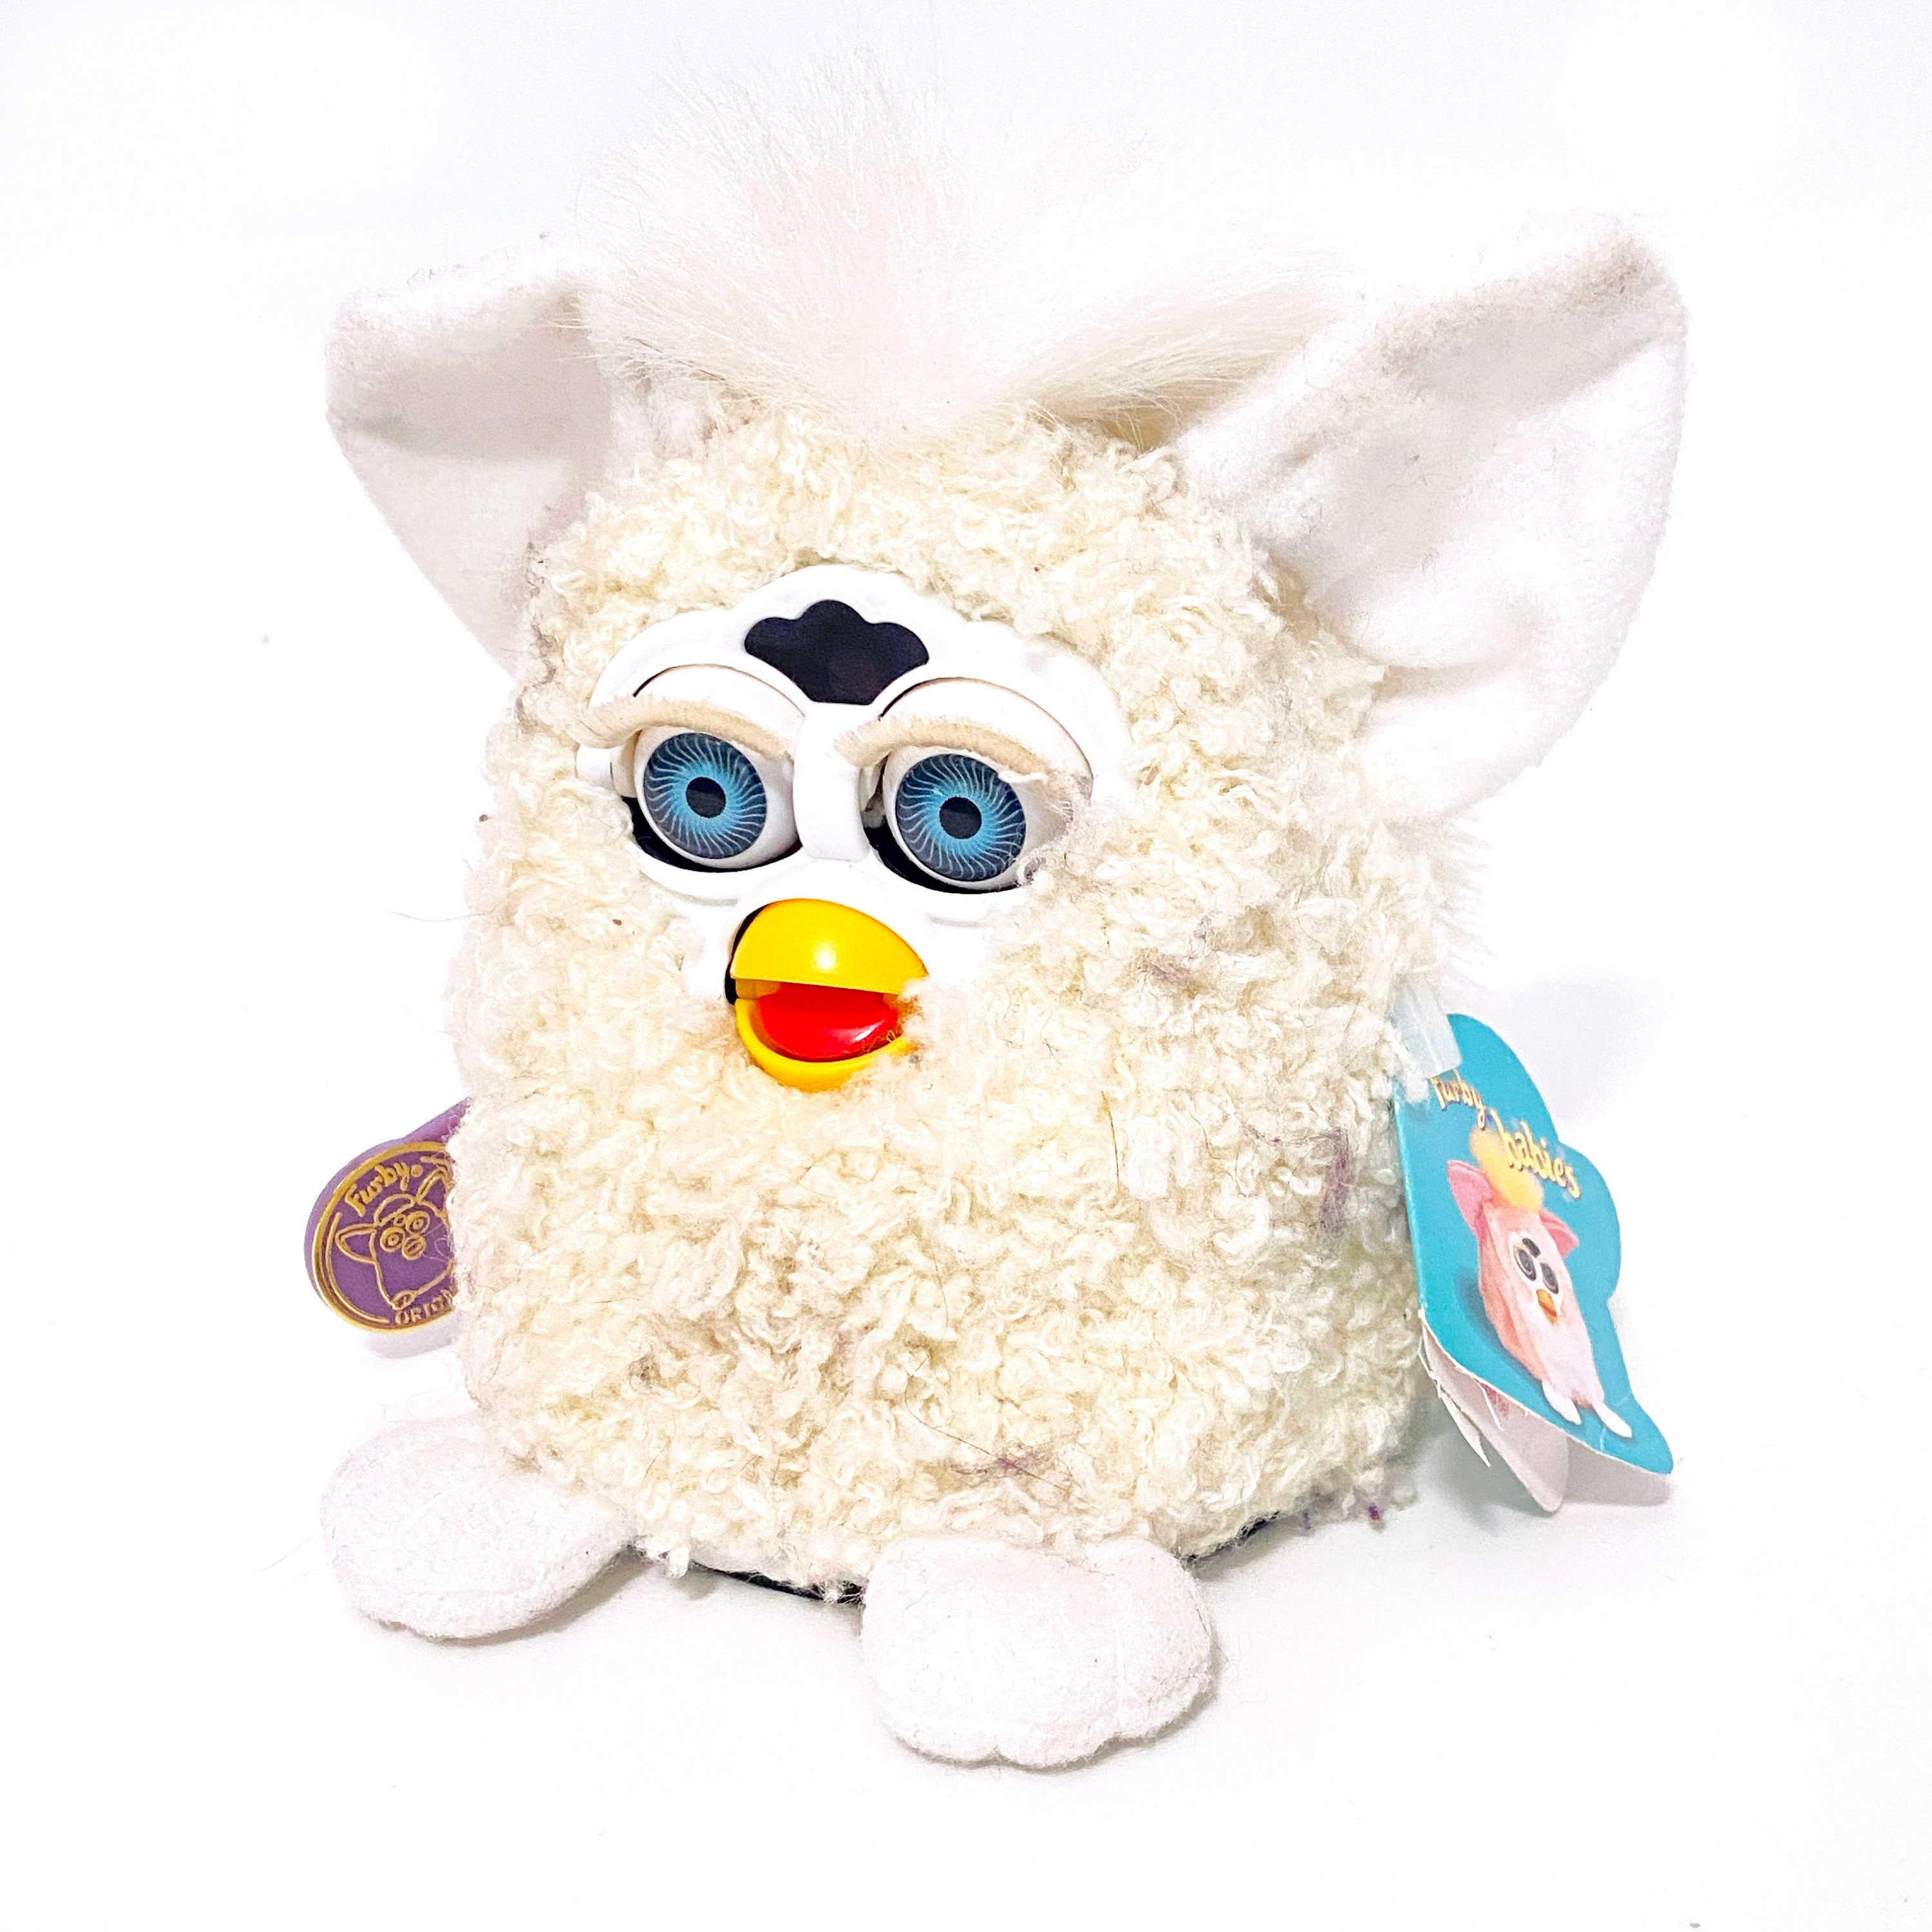 The babies from every era : r/furby